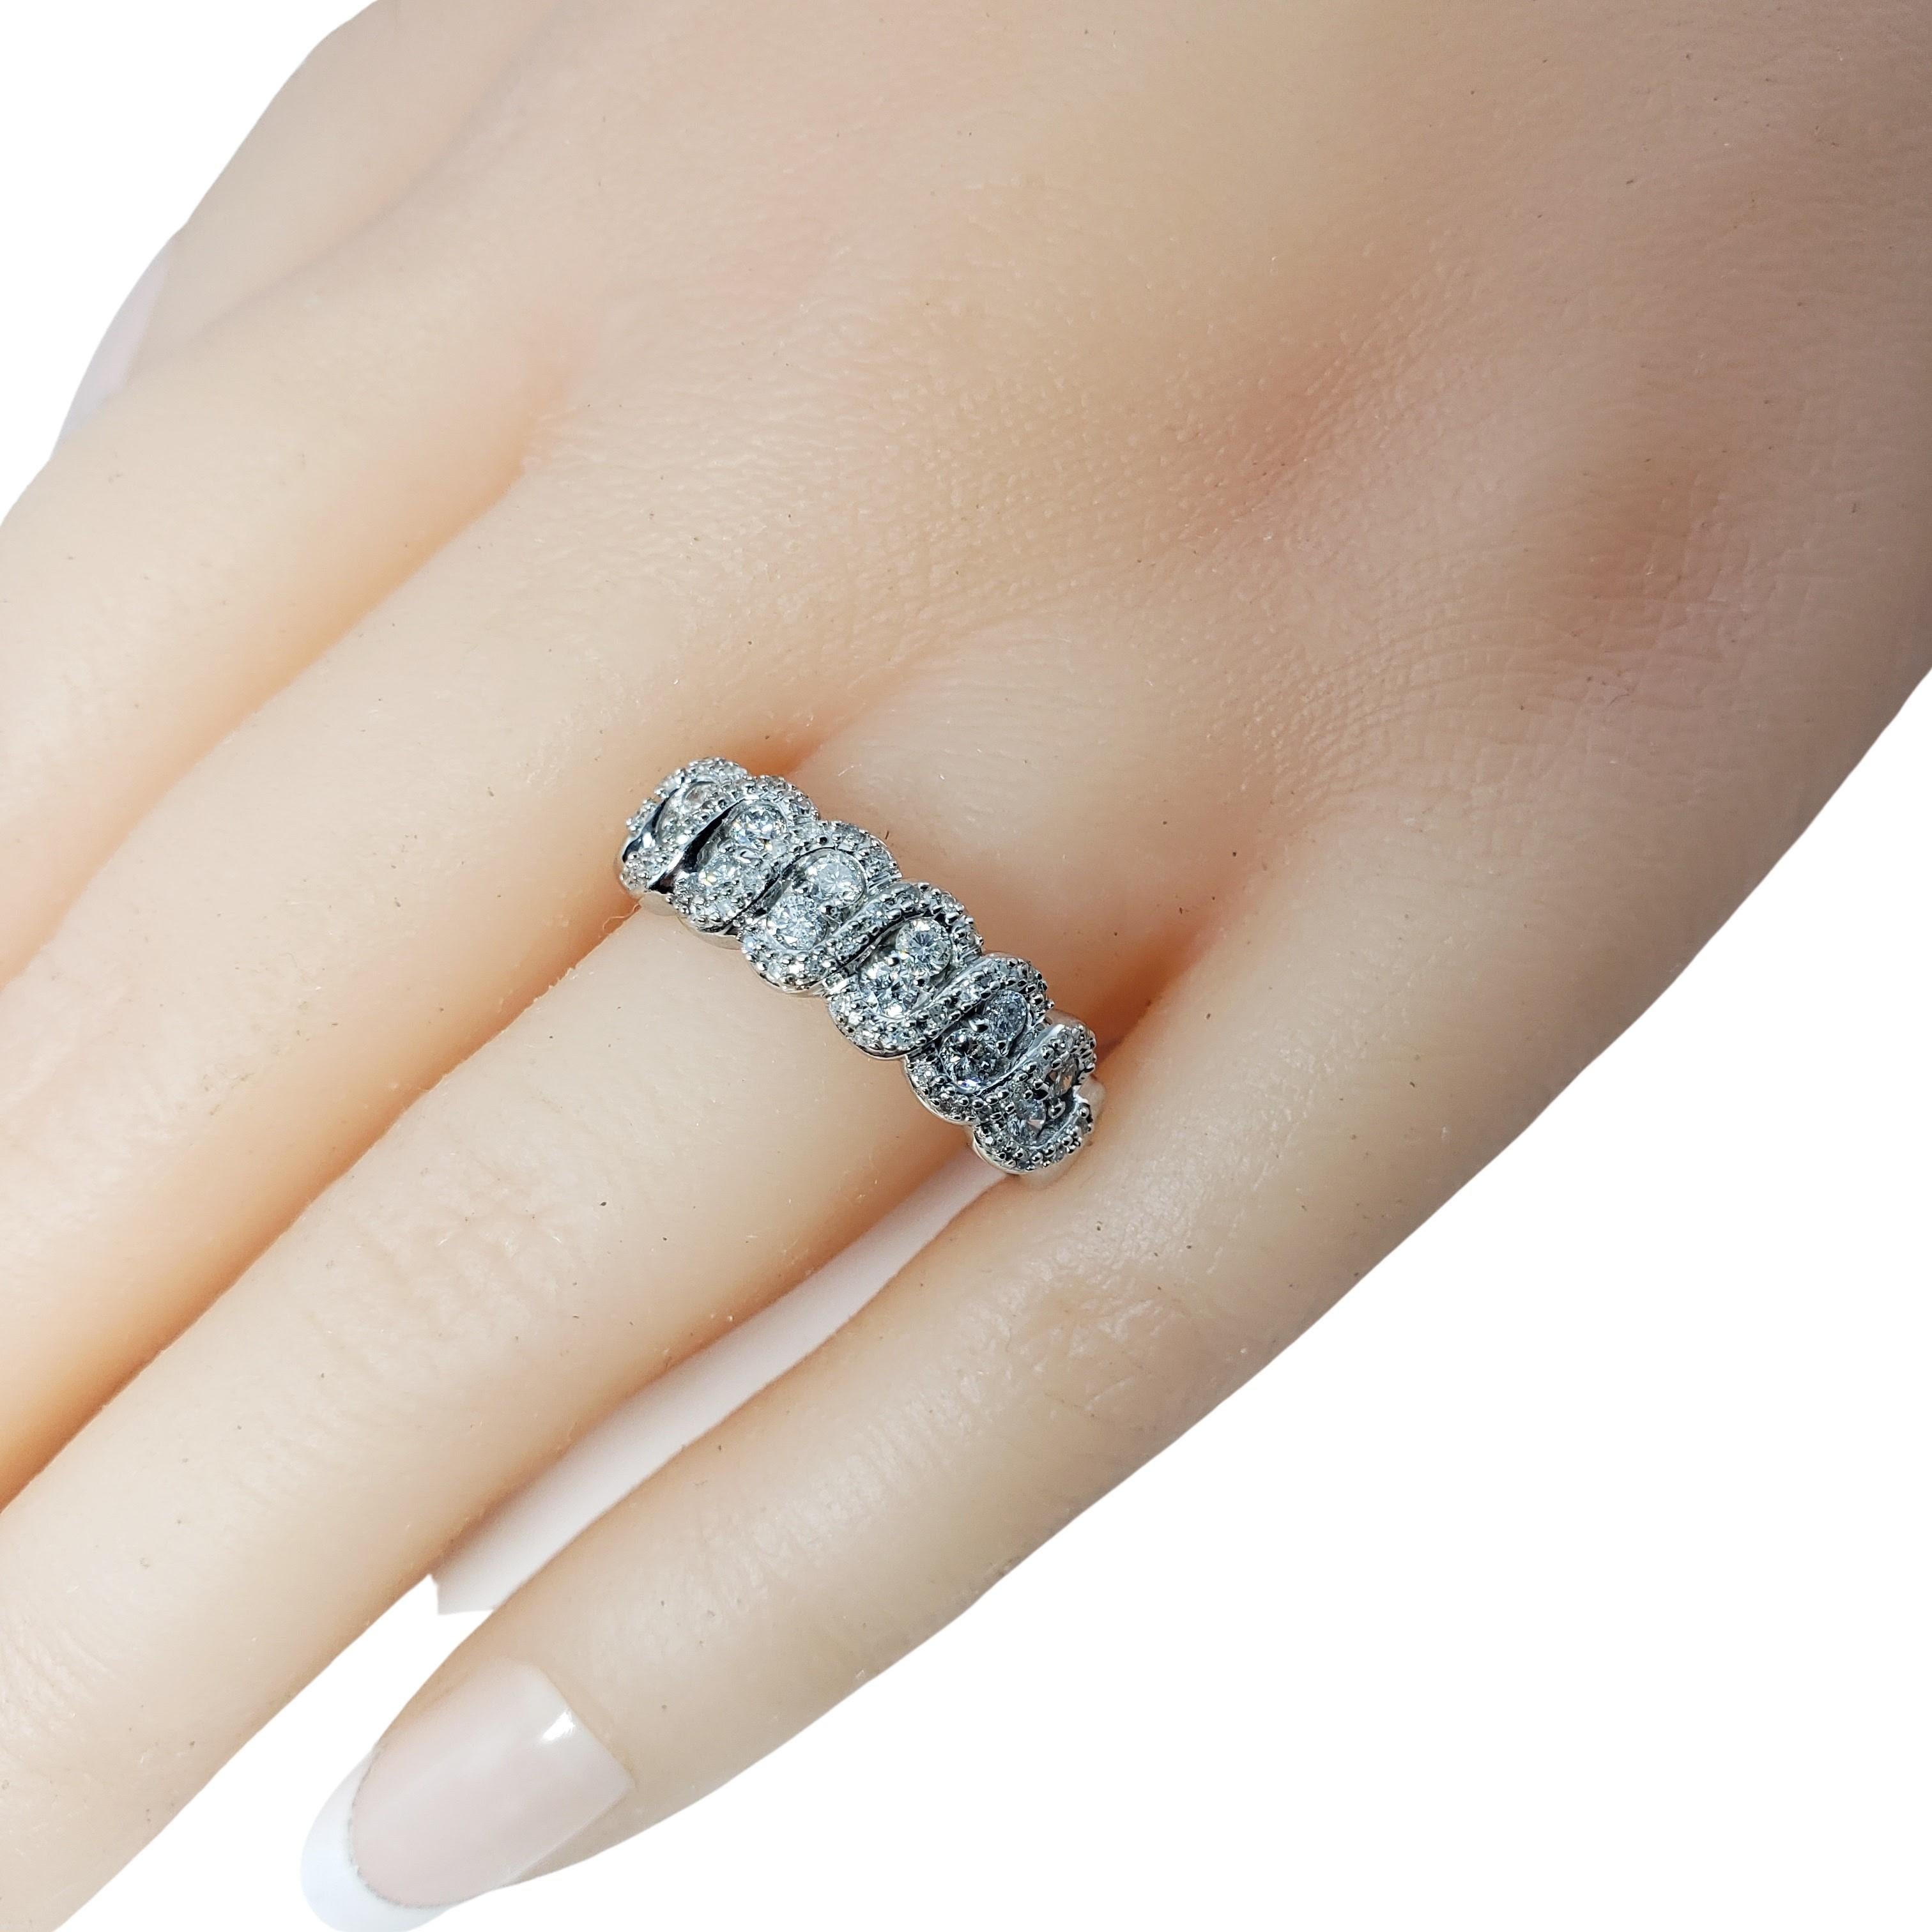 Vintage 10 Karat White Gold and Diamond Ring Size 8.25-

This sparkling ring features 12 round brilliant cut diamonds and 48 round single cut diamonds set in classic 10K white gold.
Width: 7 mm. Shank: 2 mm.

Approximate total diamond weight: .68